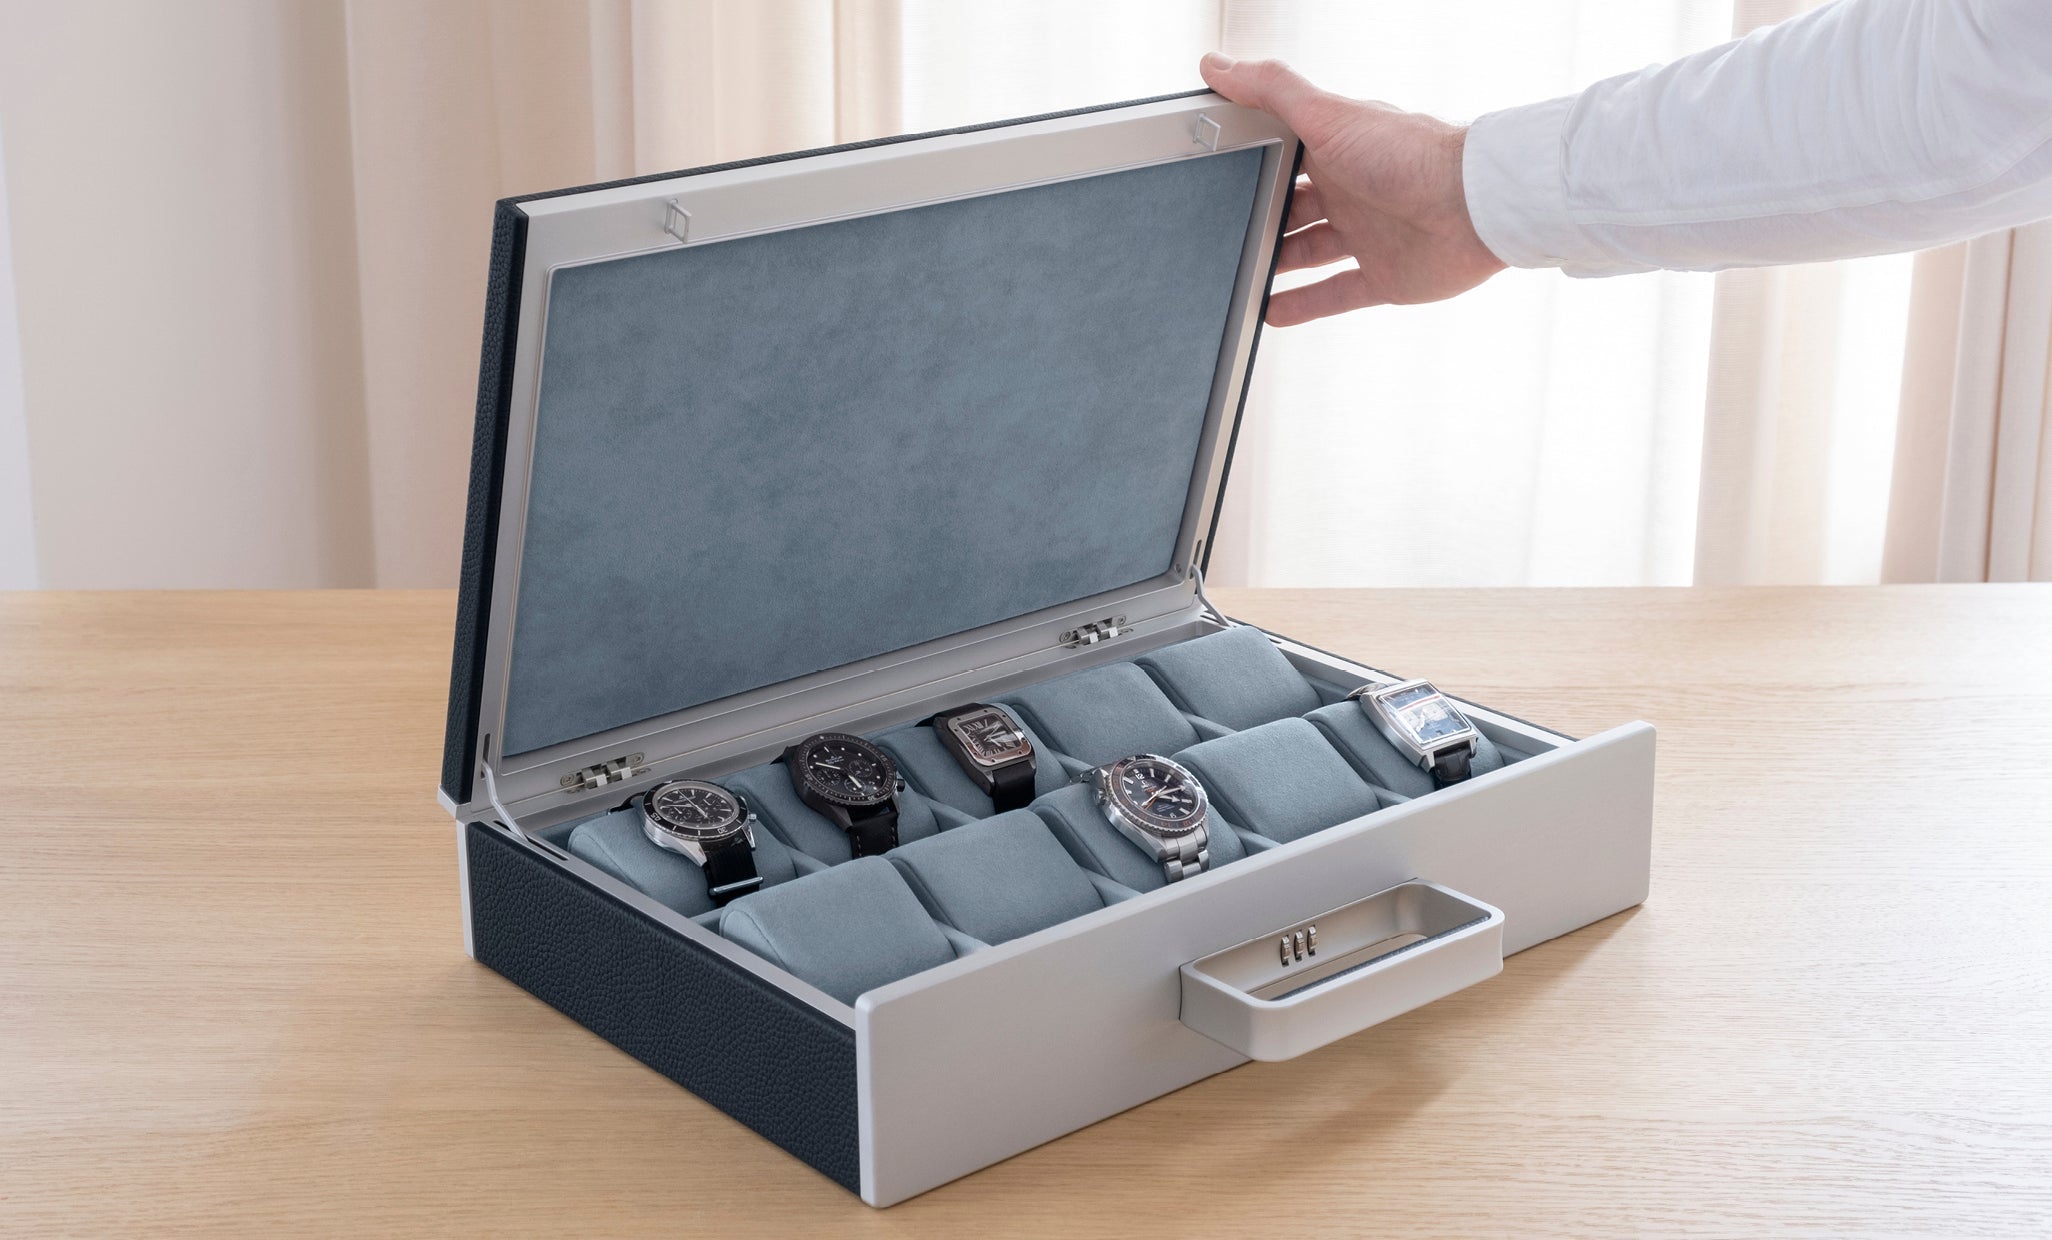 watch accessories for up to 10 watches, watch storage solution for up to 10 pieces, watch collection briefcase